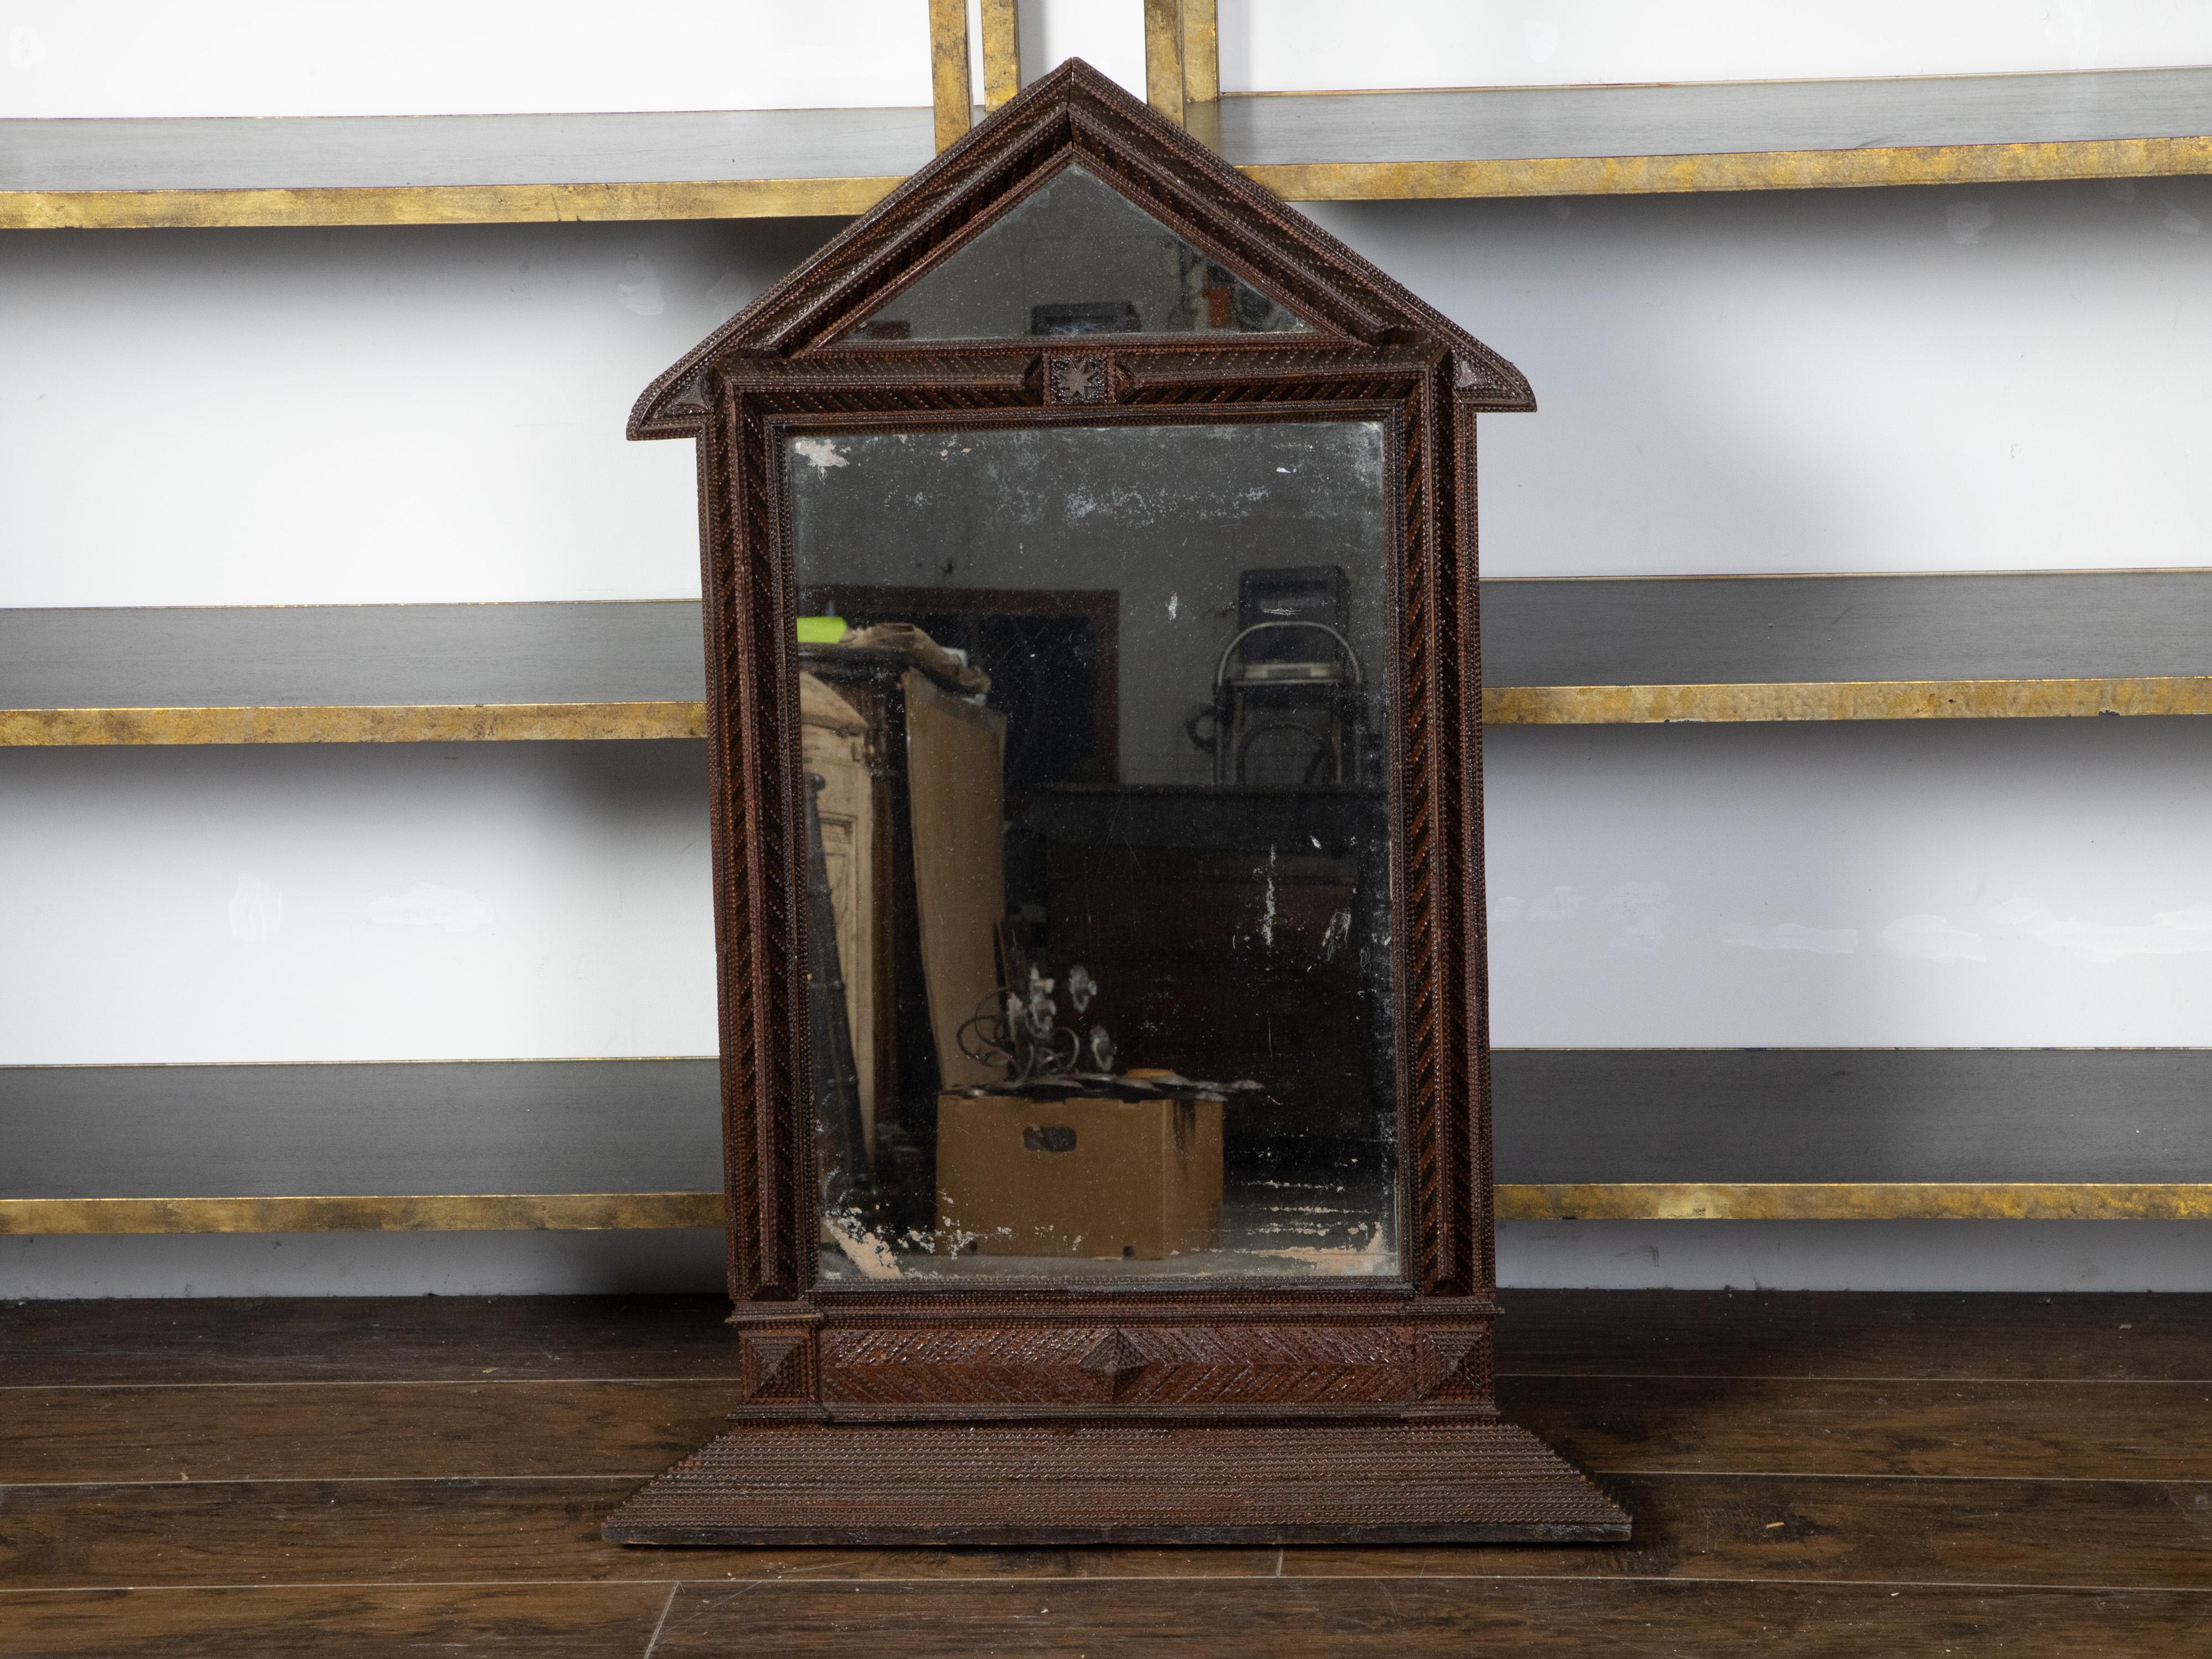 A French tramp Art hand-carved mirror from the early 20th century, with triangular pediment and pyramidal accents. Created in France during the Turn of the Century, this mirror was hand carved in the manner typical of the Tramp Art style. Consisting